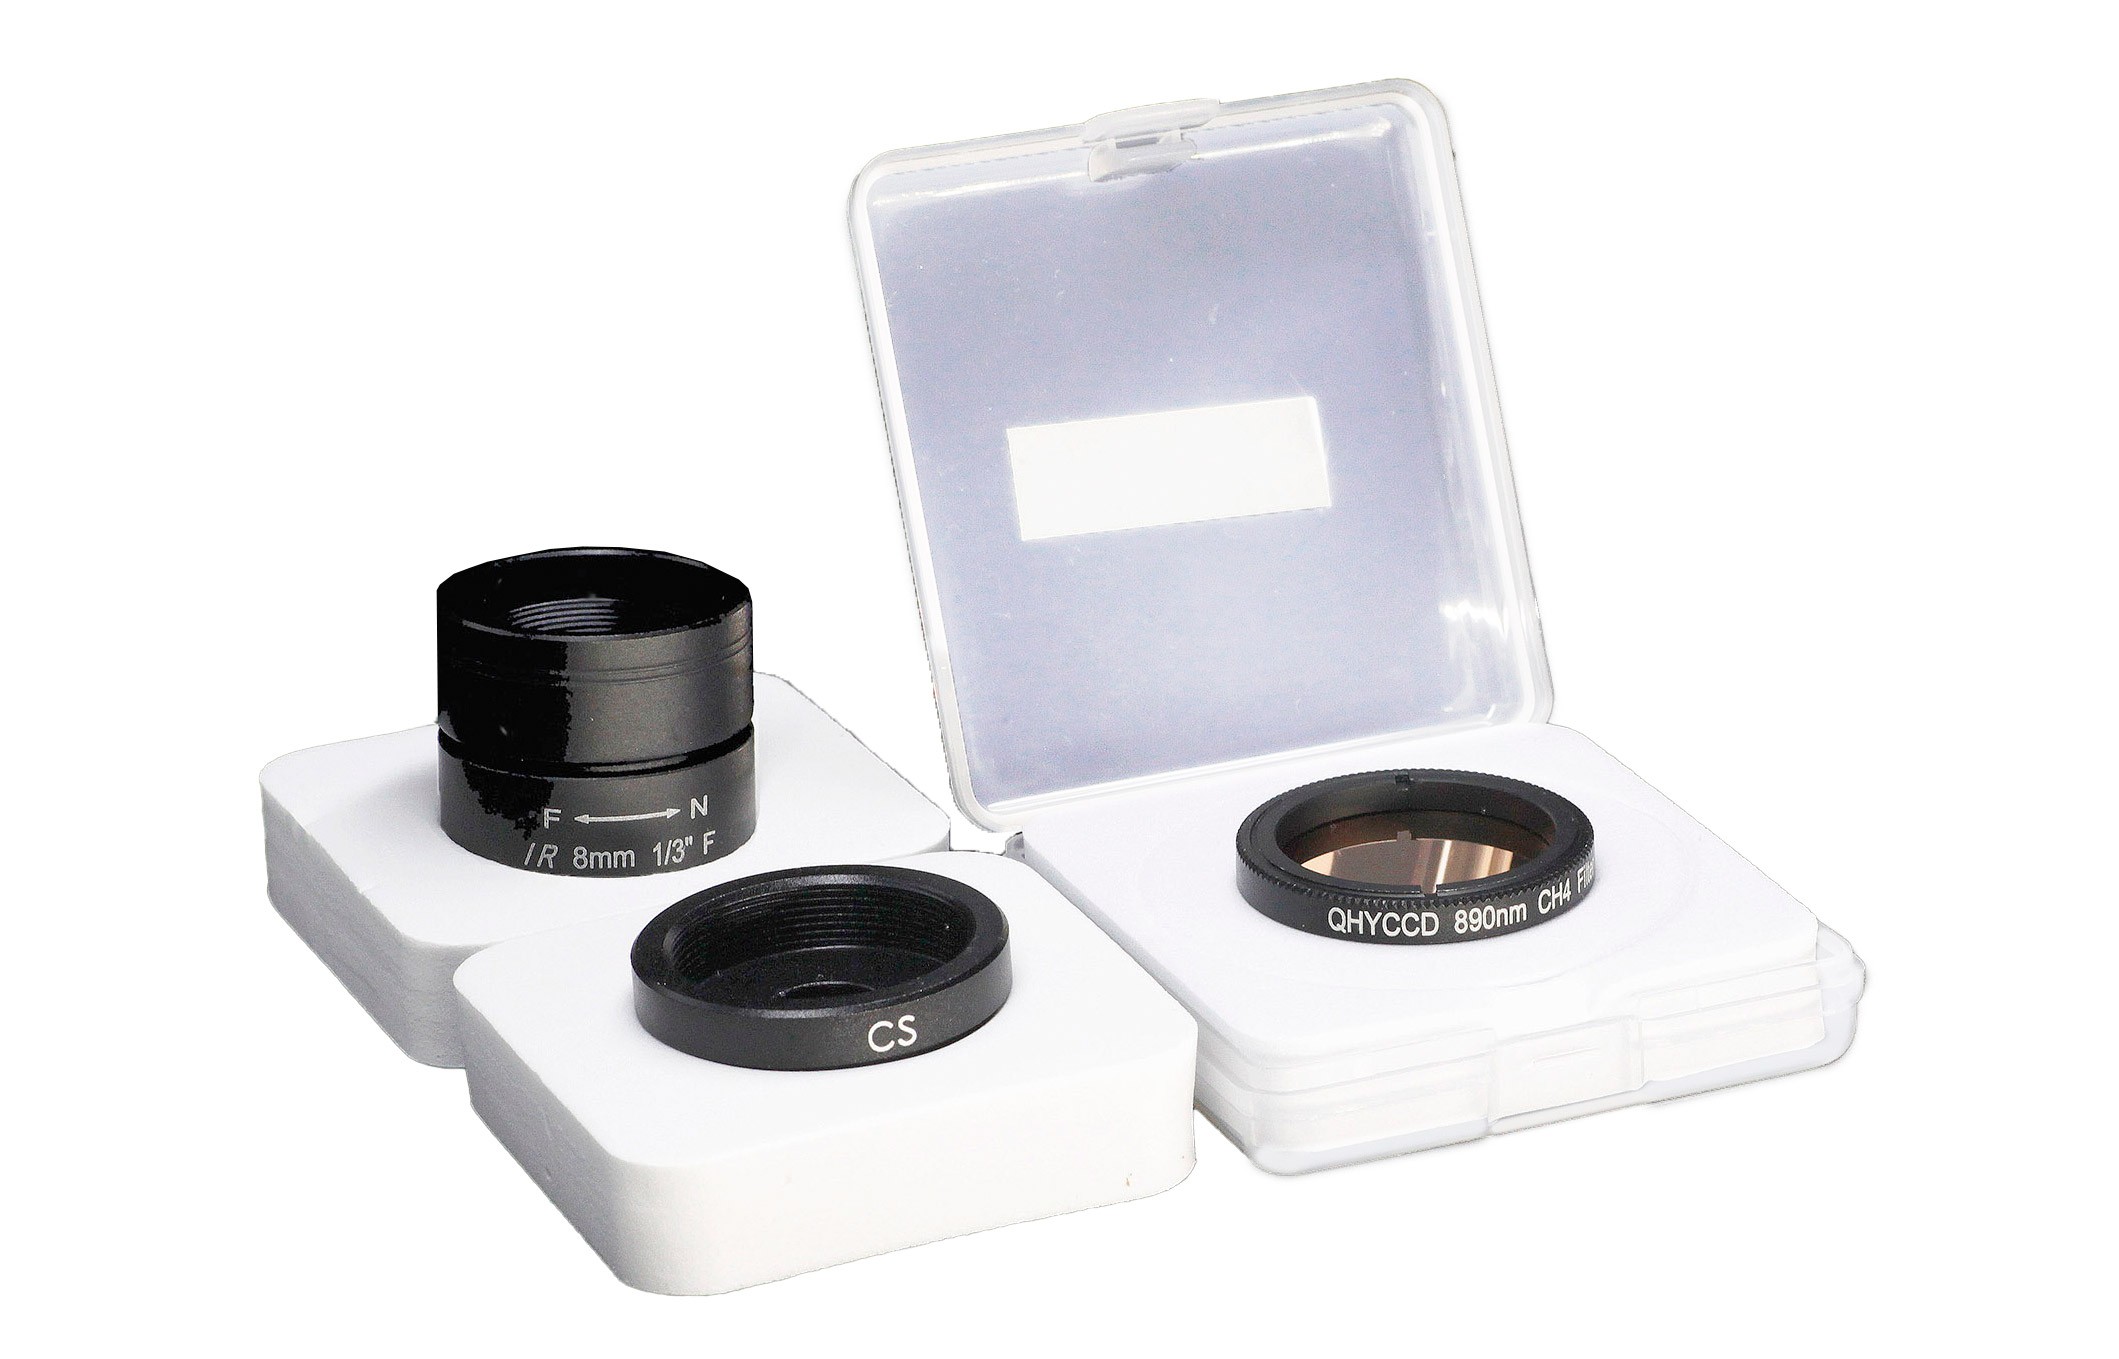  Expansion Kit für QHY-5-III-462C: 1.25" Methane filter (890nm), Wide Angle all sky lens, CS mount adapter  